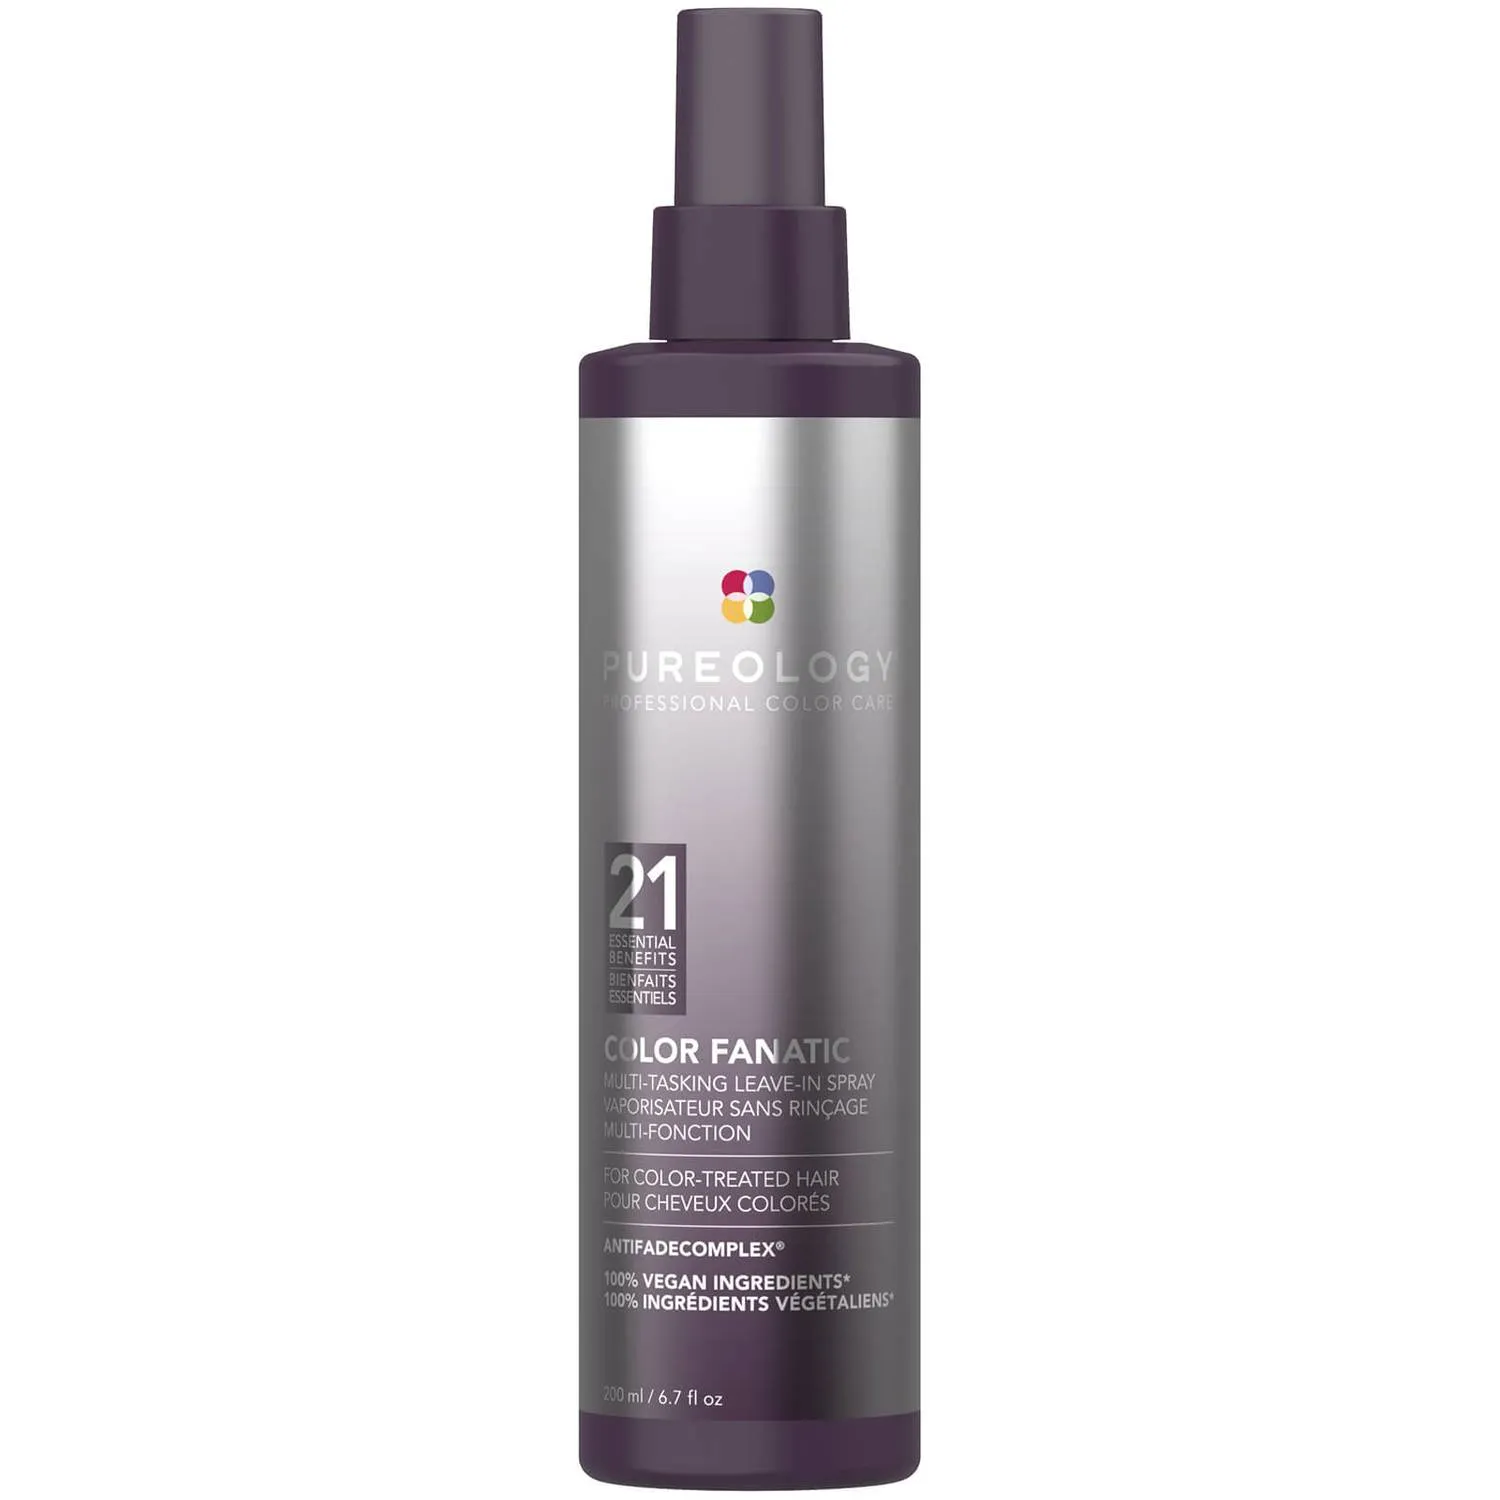 A tied FEMMENORDIC's choice in the Pureology vs Redken treatment comparison, Pureology Color Fanatic Multi-Tasking Leave-In Spray